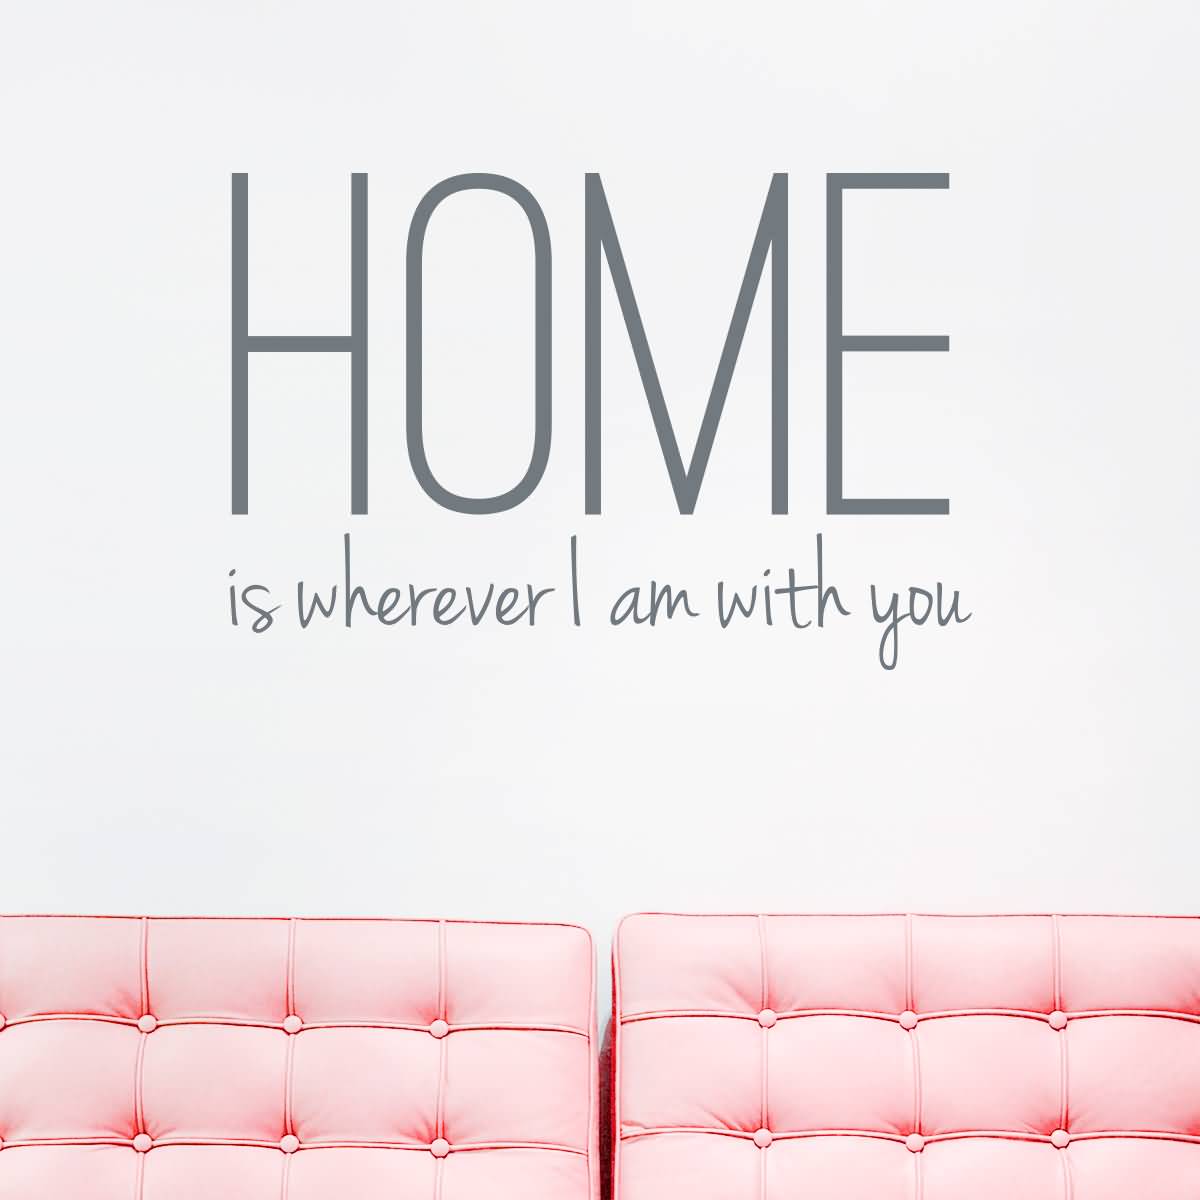 Home is wherever I’m with you.